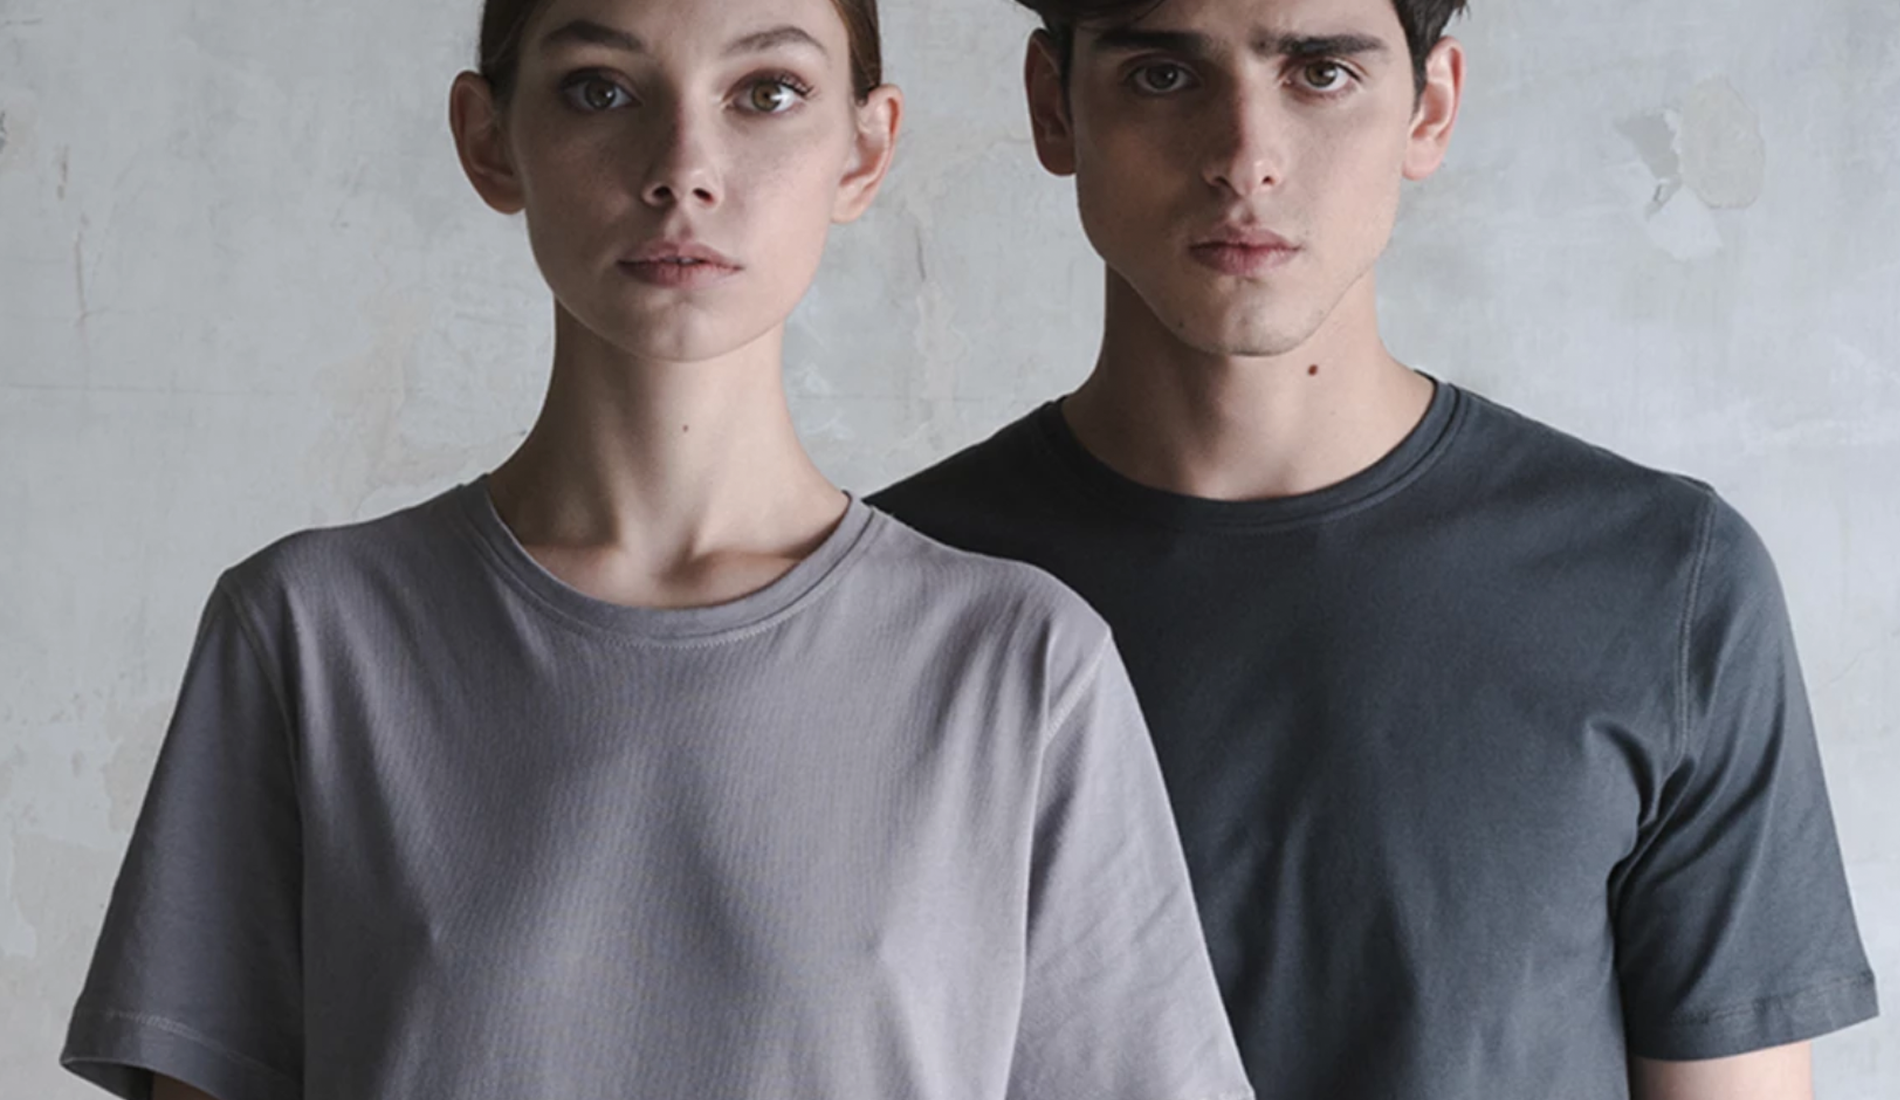 image of a woman and man wearing grey t-shirts against a grey background